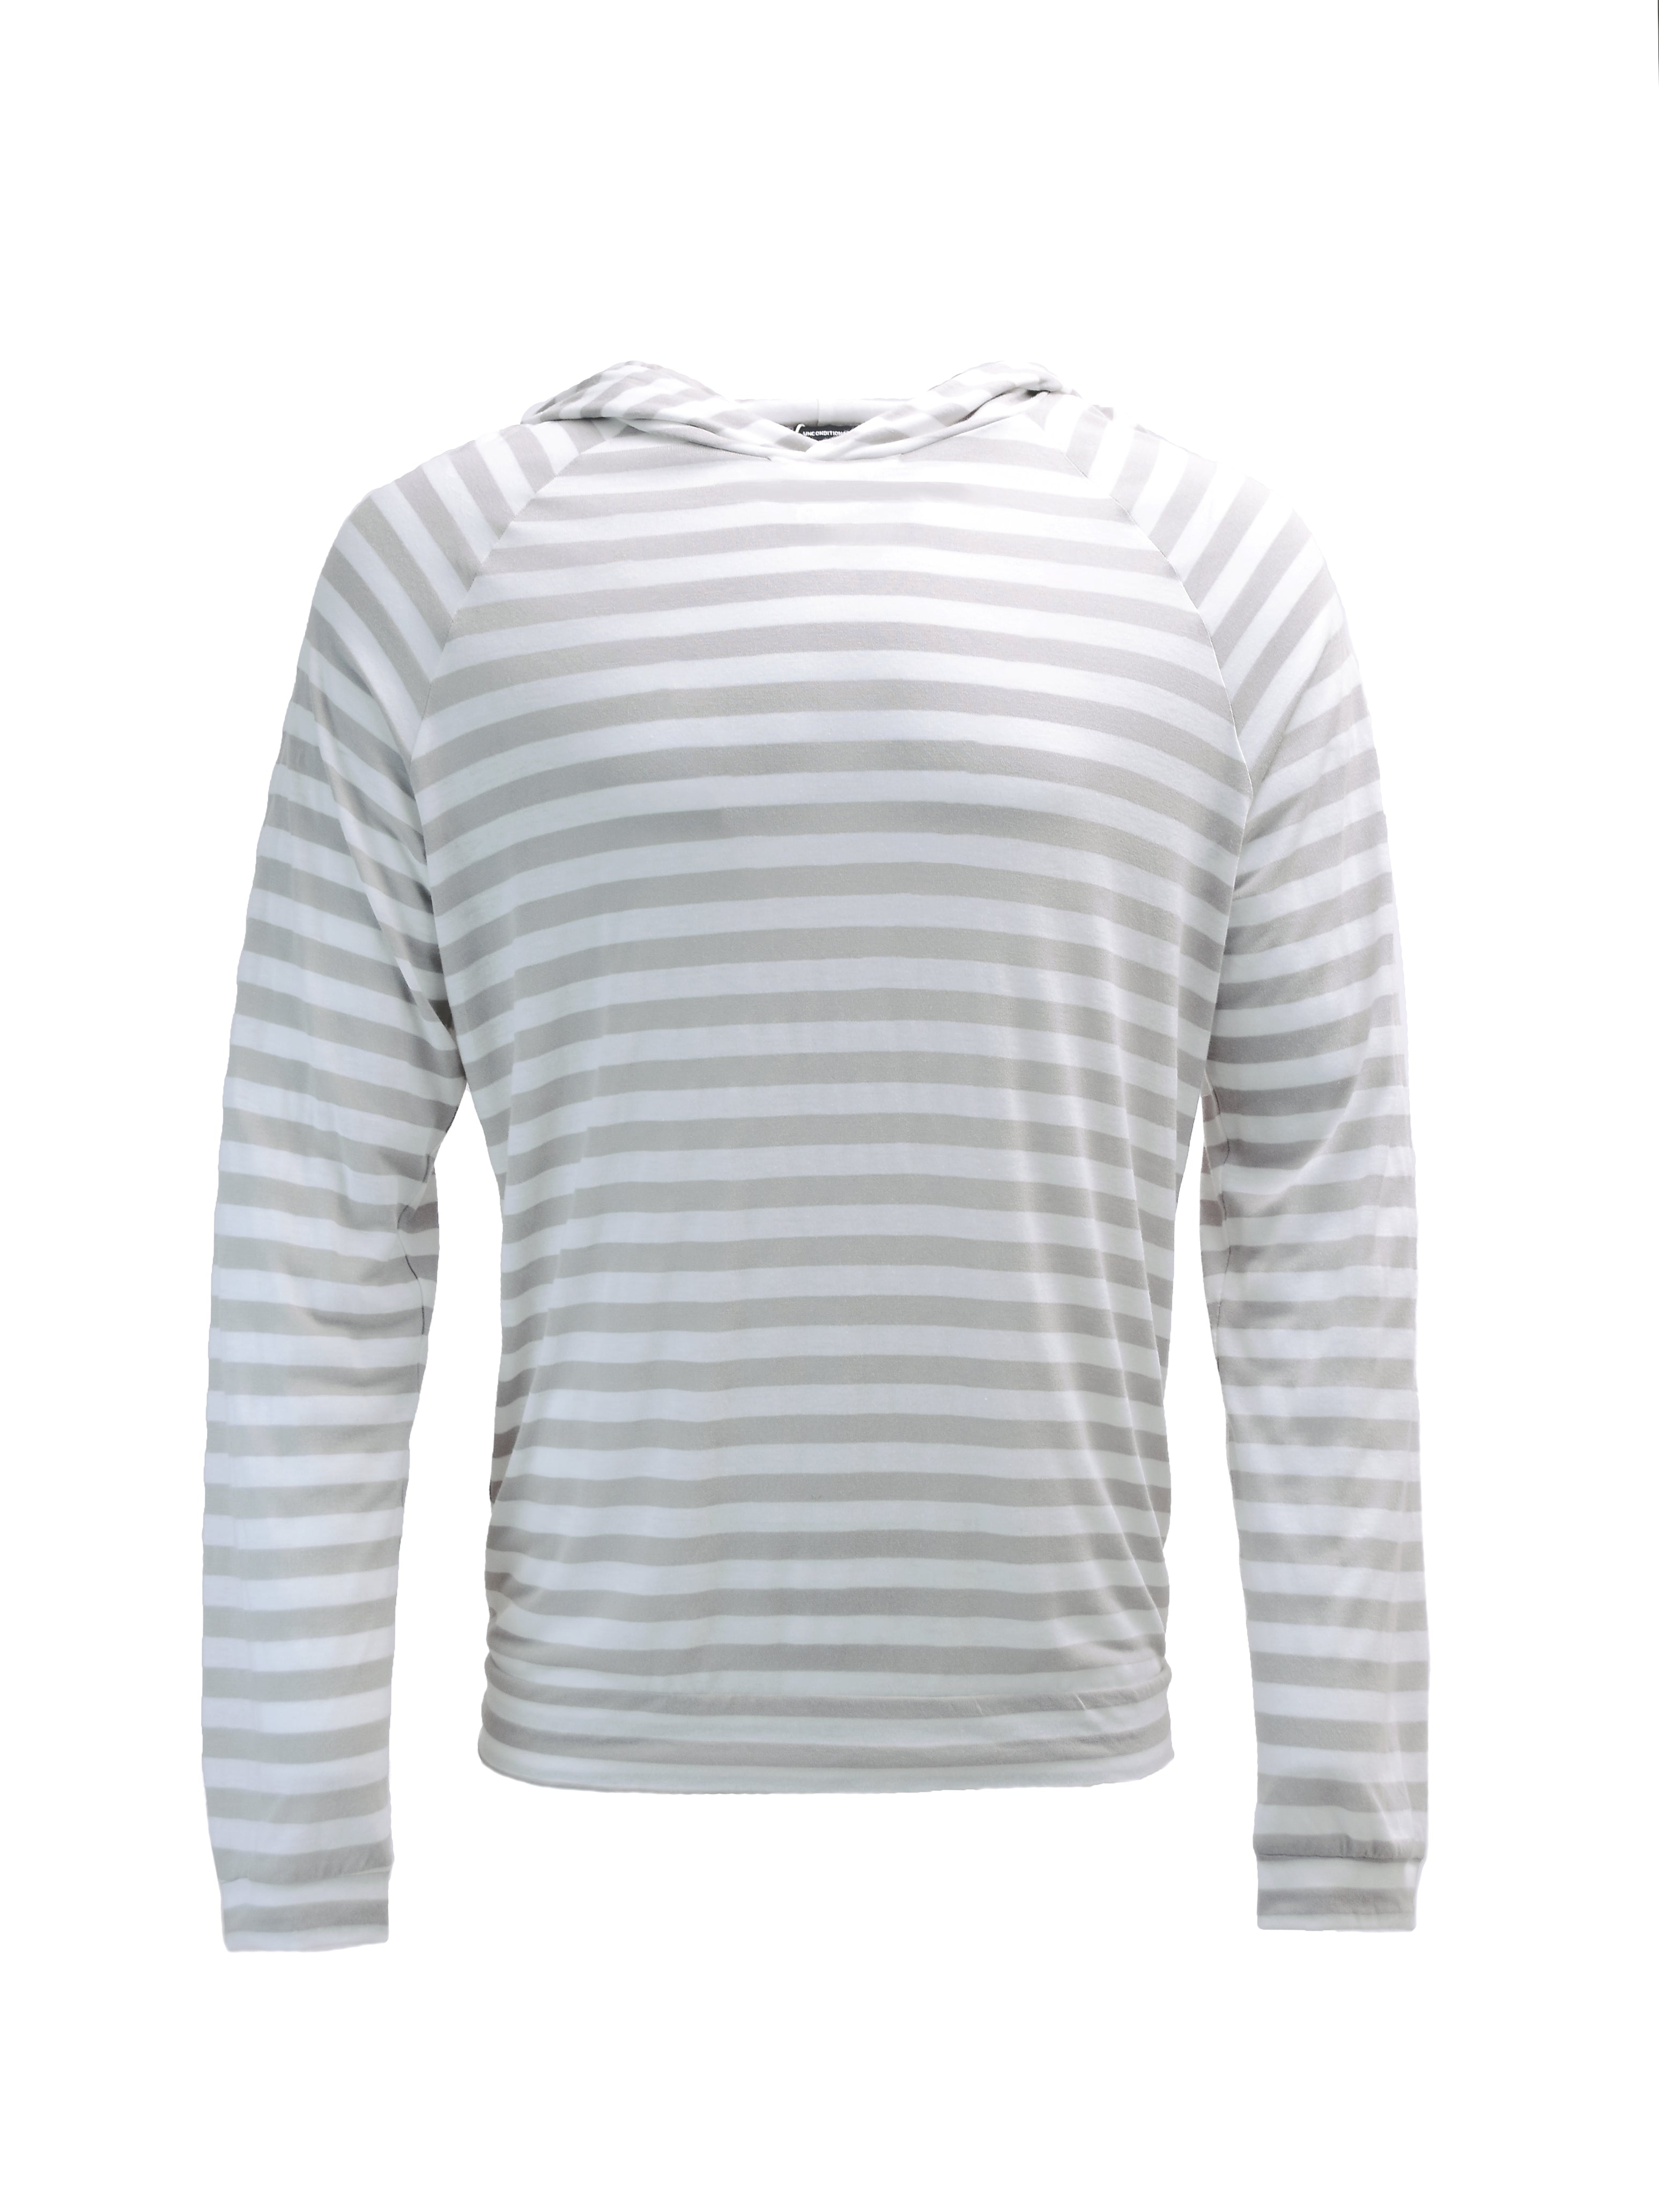 WHITE AND GREY STRIPED HOODIE TOP